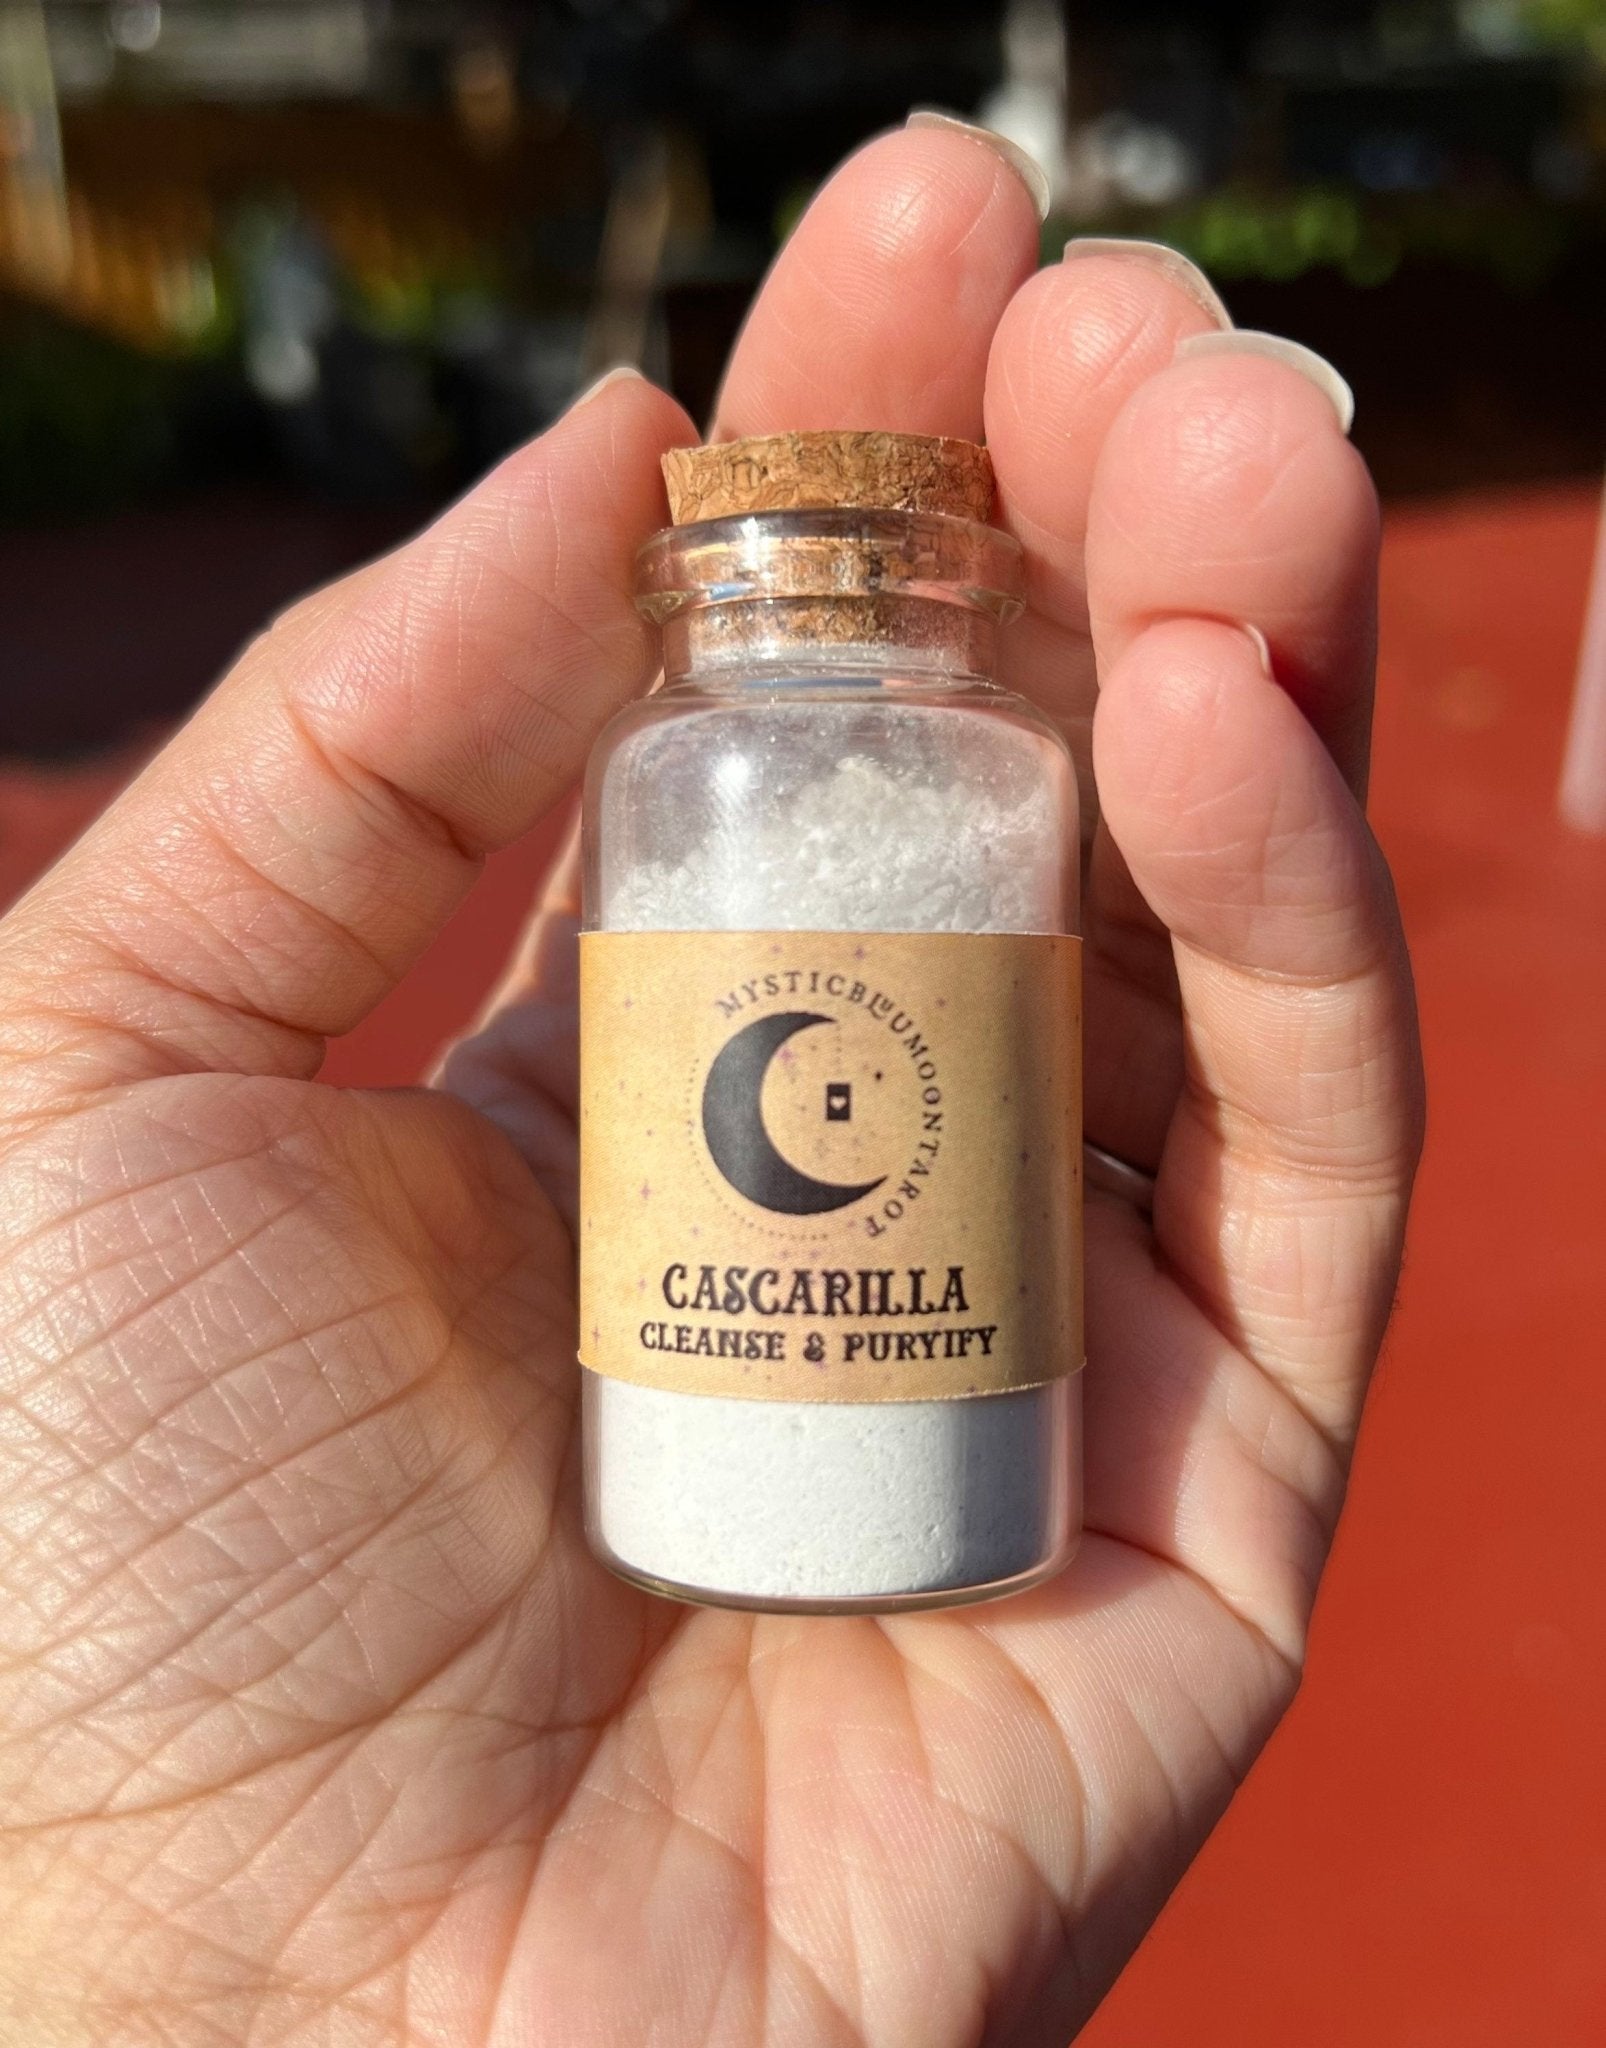 Using Cascarilla For Protection, Purification, and Cleansing